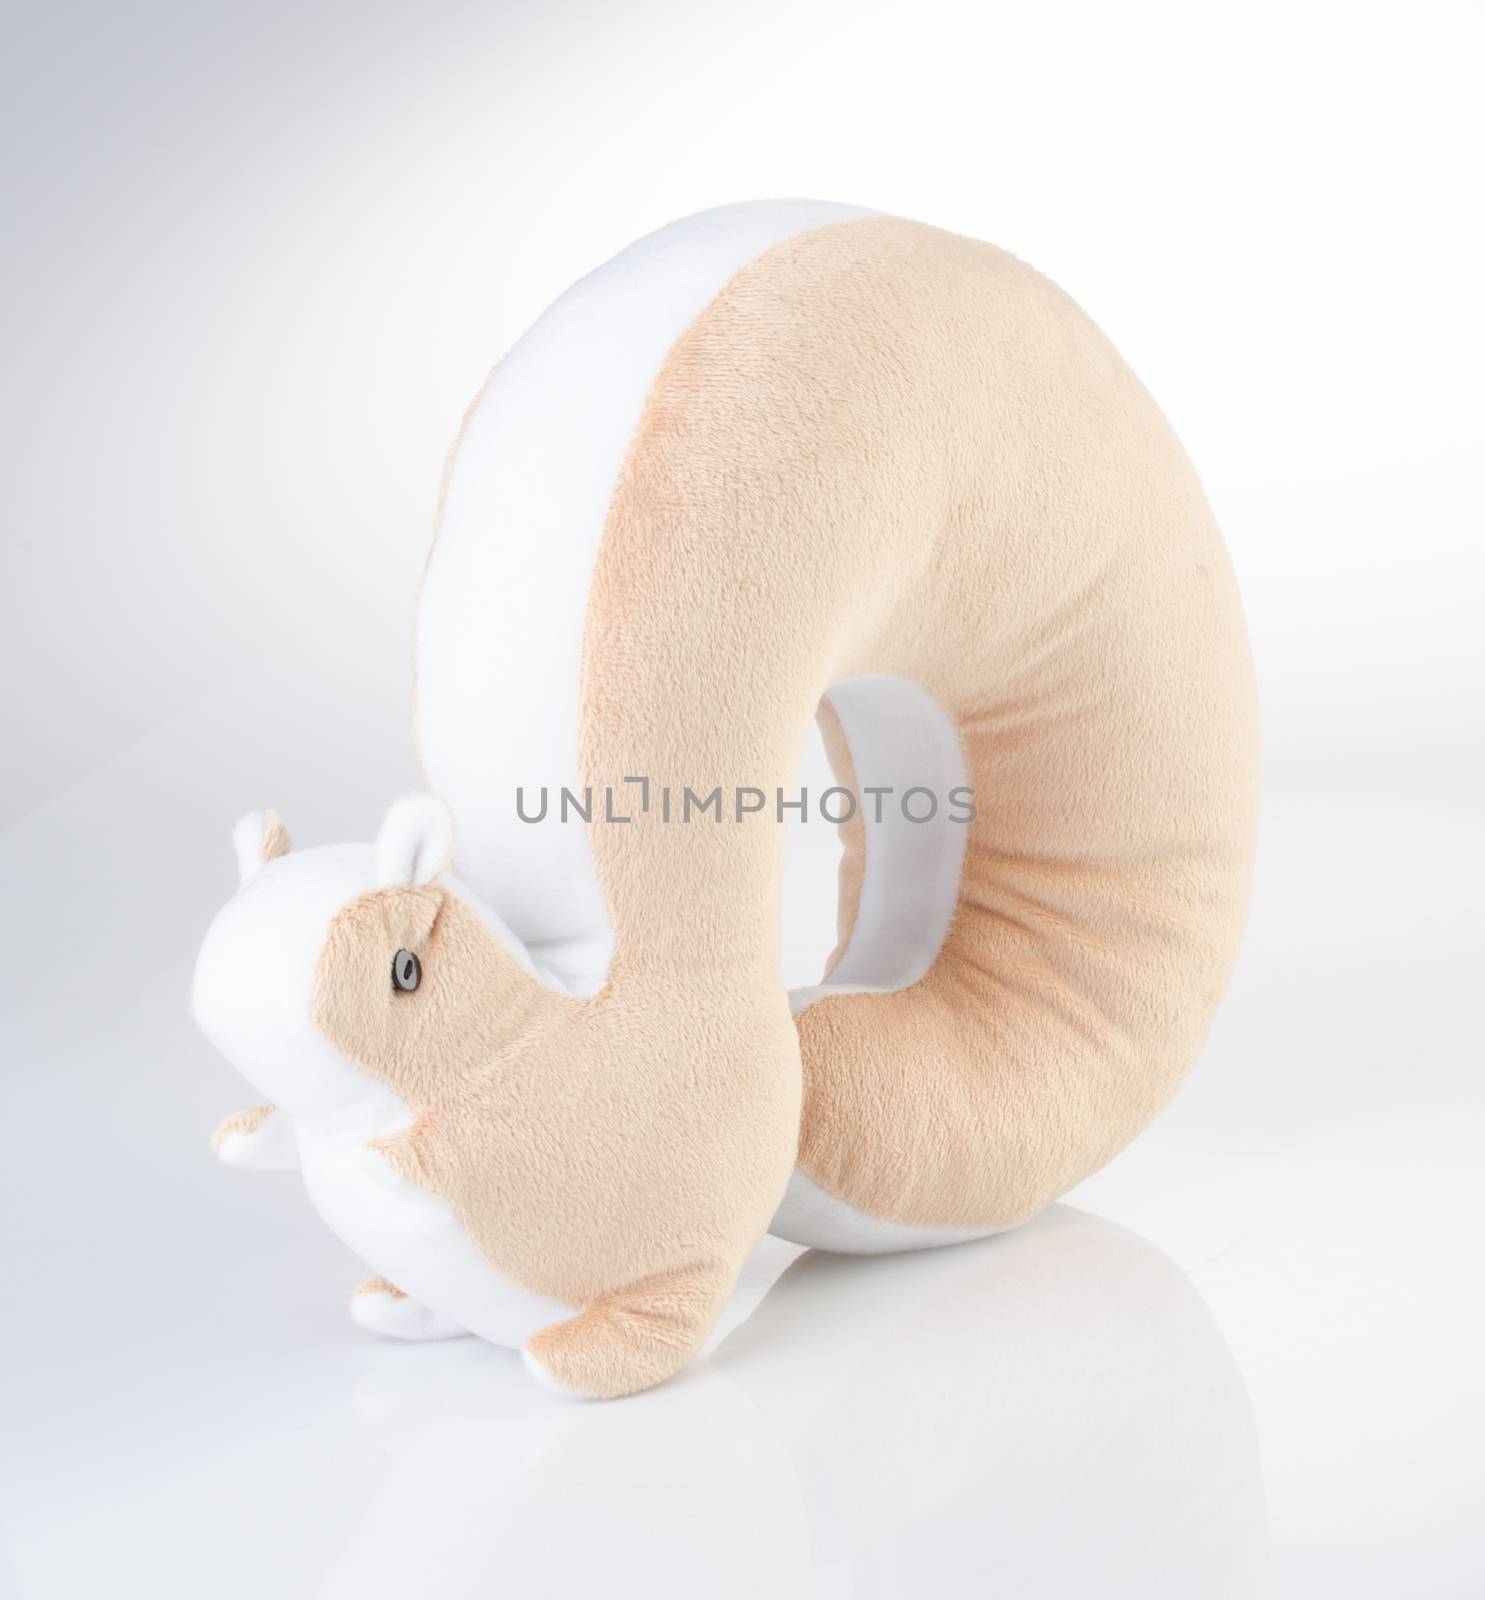 Neck pillow on the background. colour Neck pillow on the backgro by heinteh